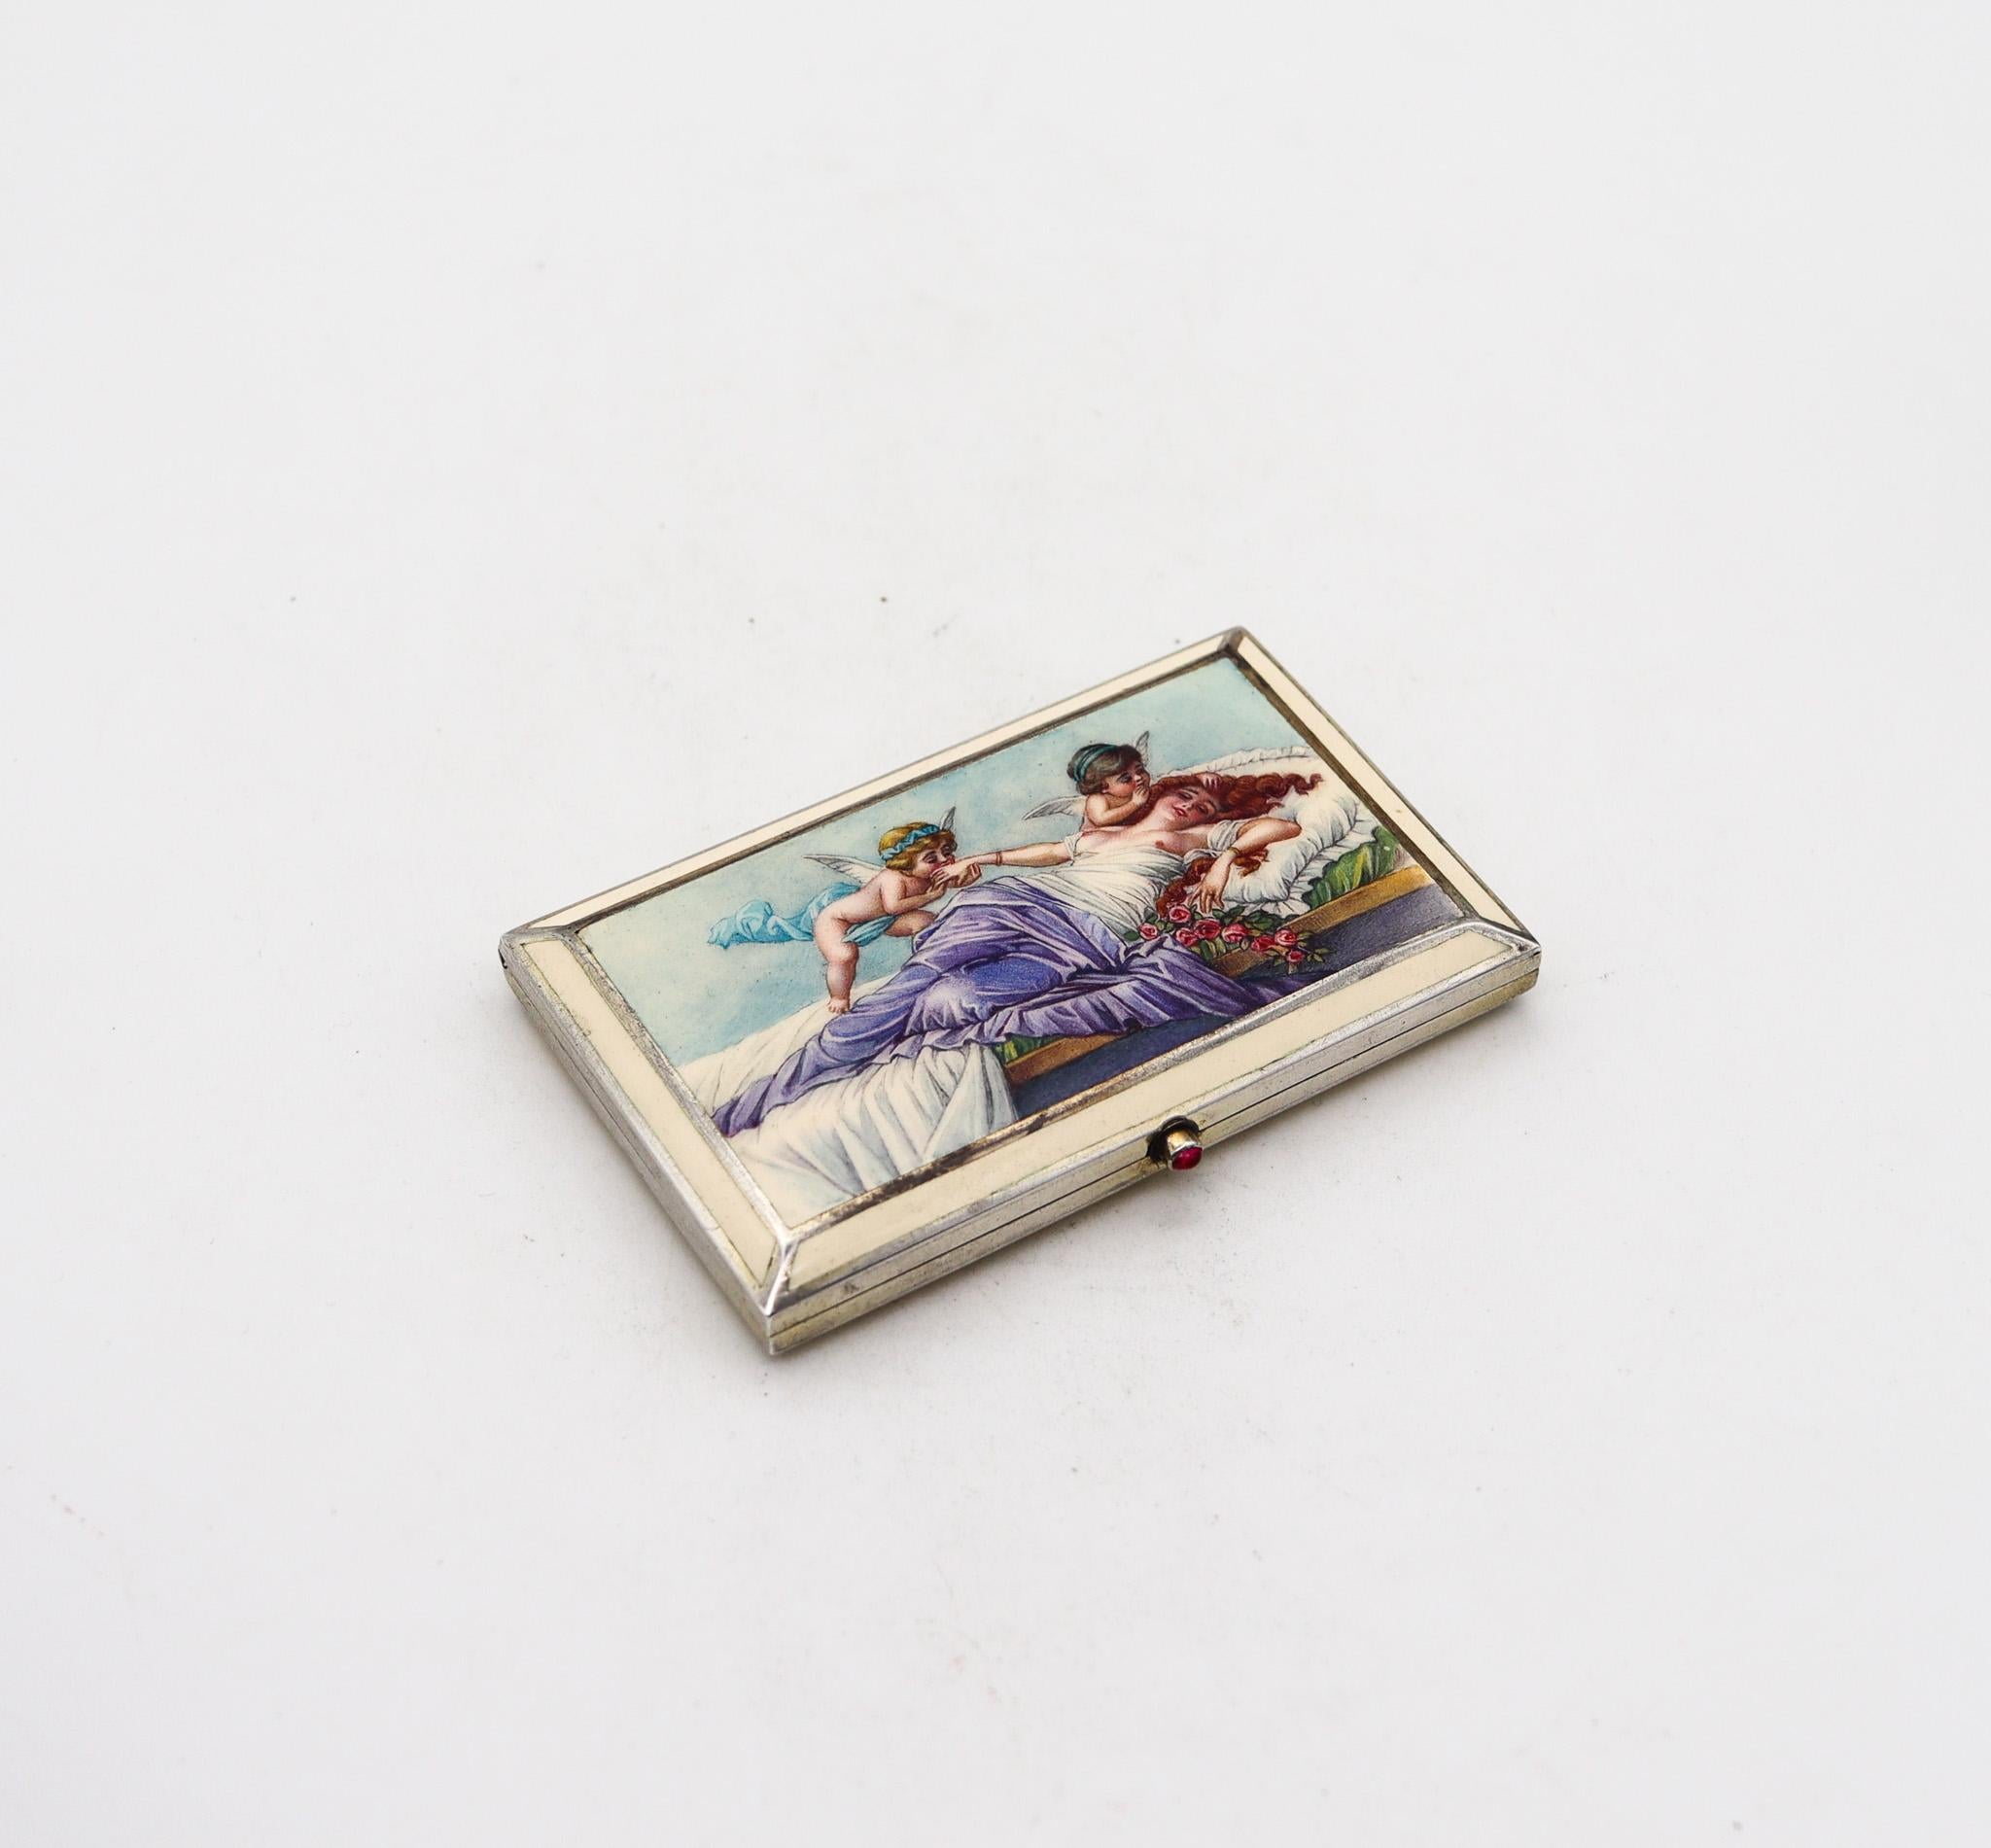 Austria art nouveau allegorical enamelled box

A very beautiful Austro-Hungarian presentation box, created in Vienna during the art nouveau period, back in the early 1900. This rare box is in great condition with no trace of use and was carefully